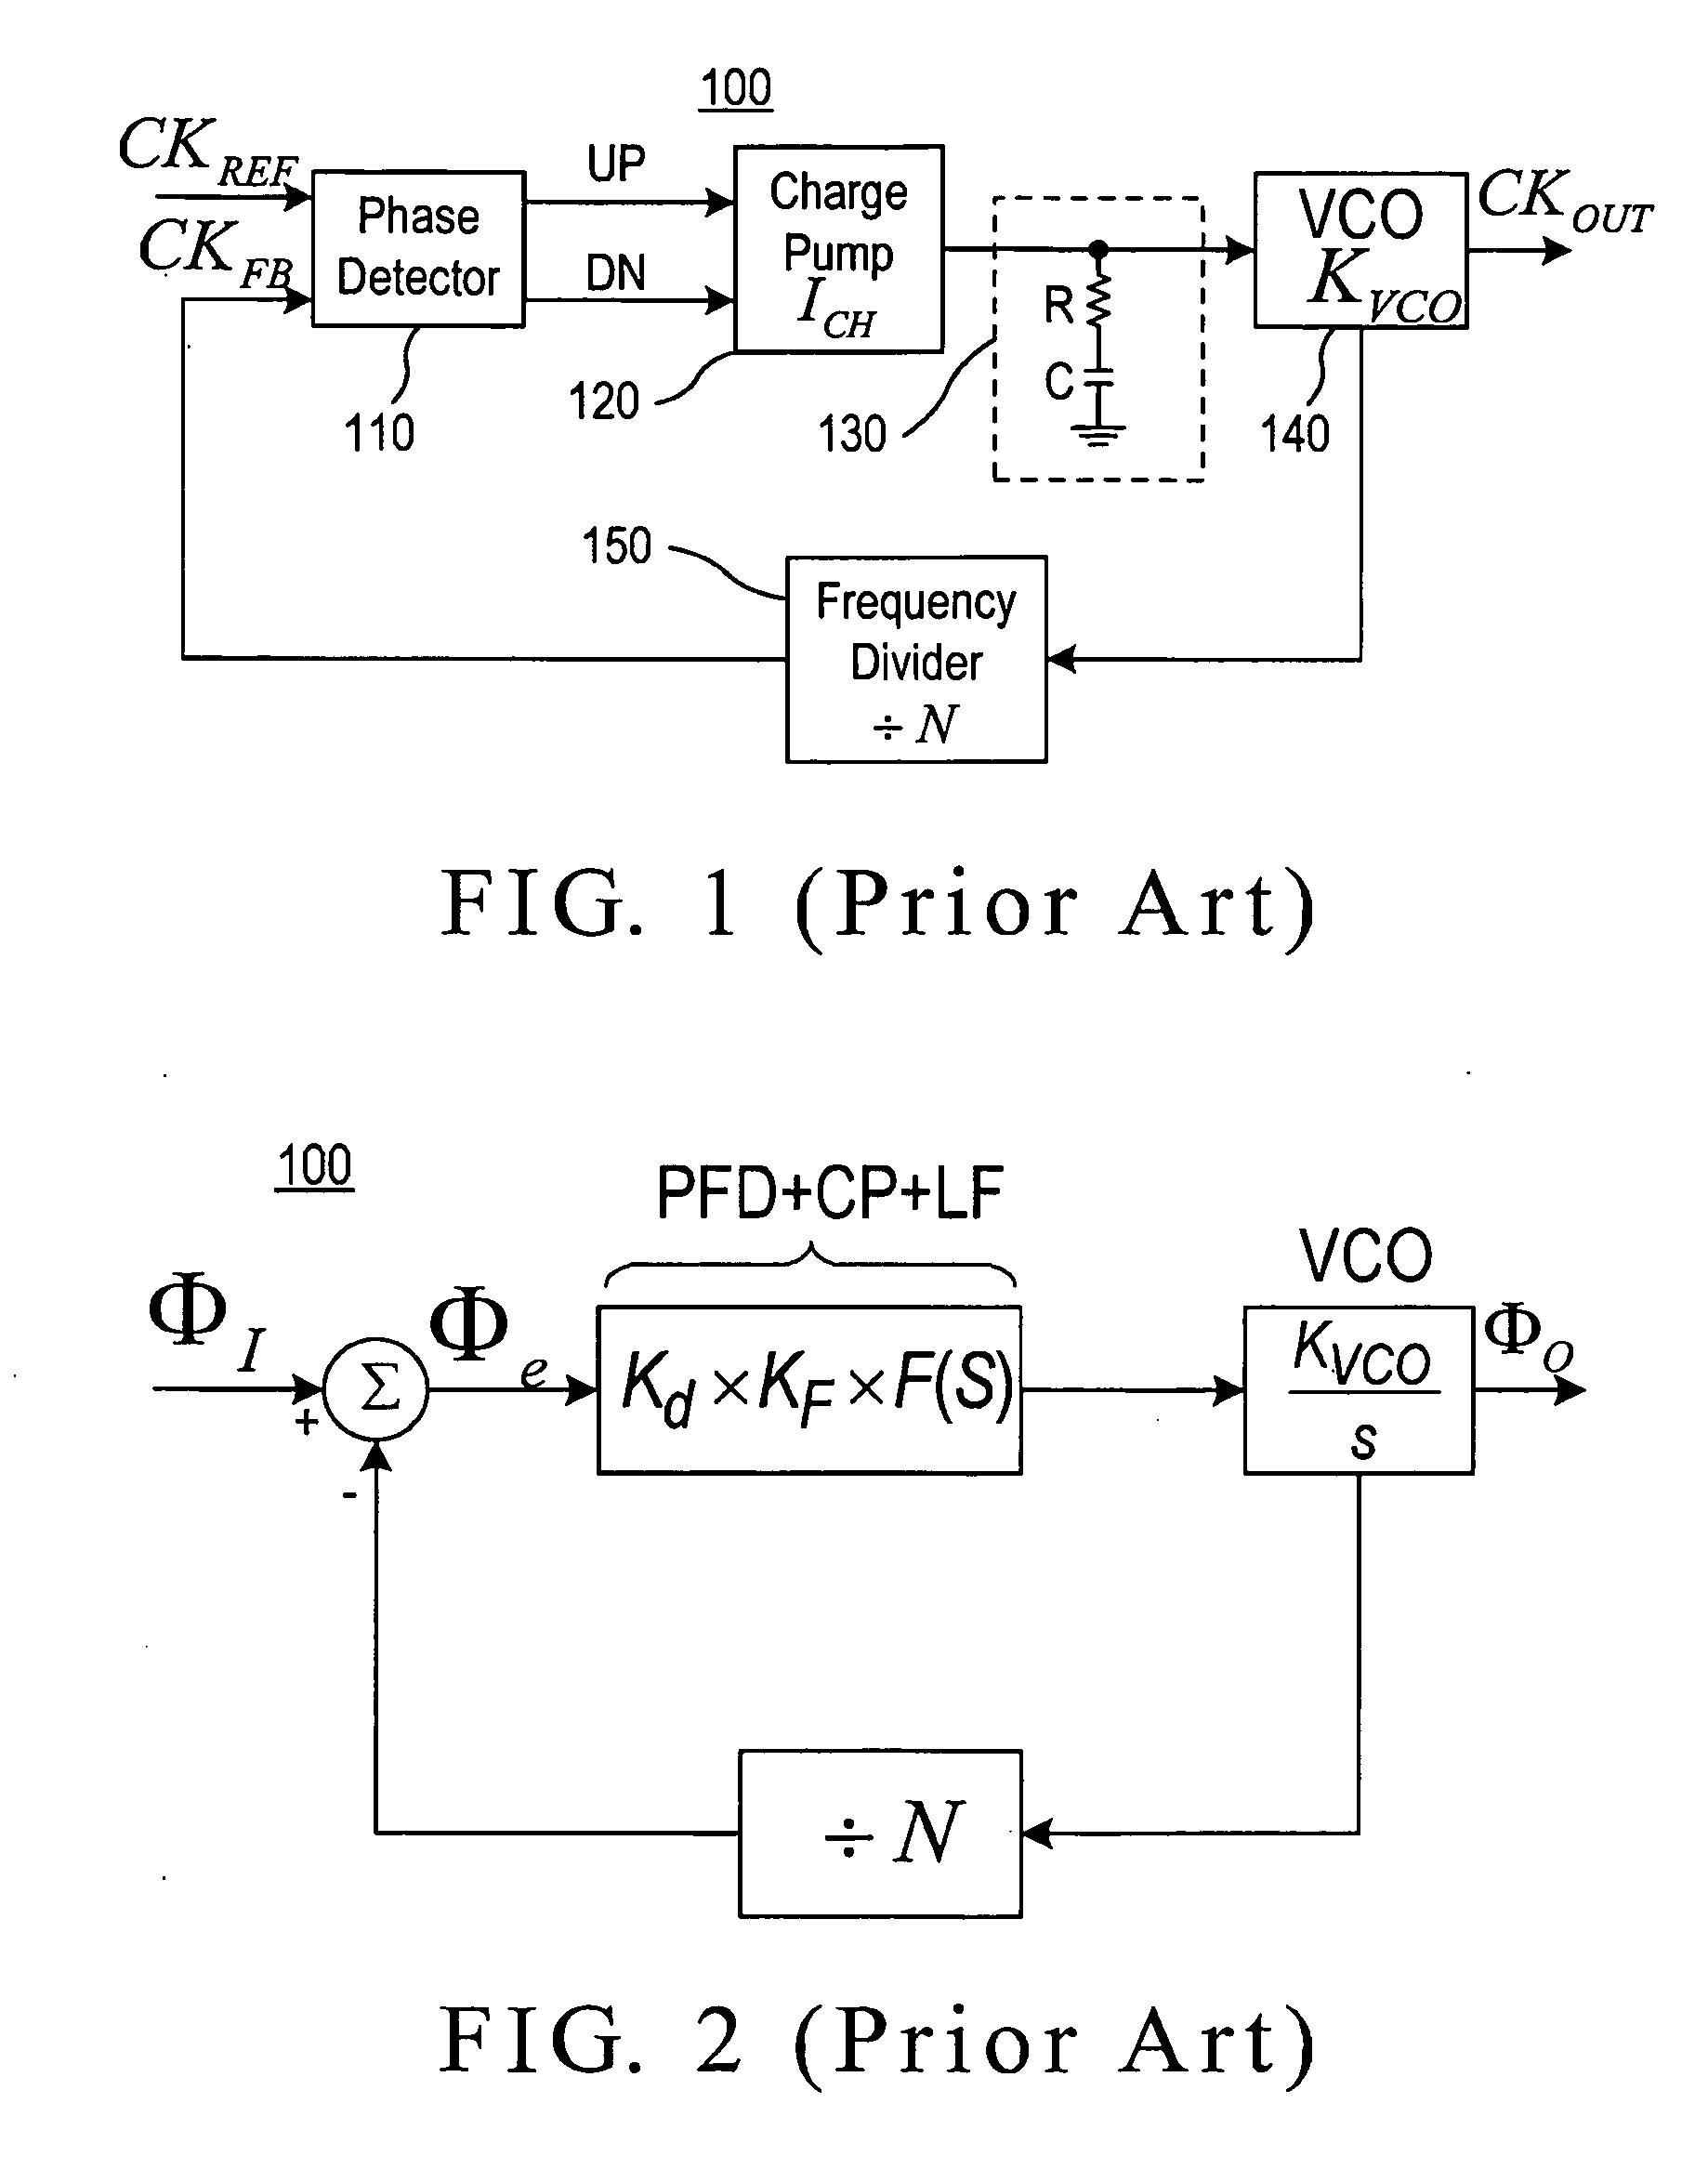 Frequency synthesis system with self-calibrated loop stability and bandwidth